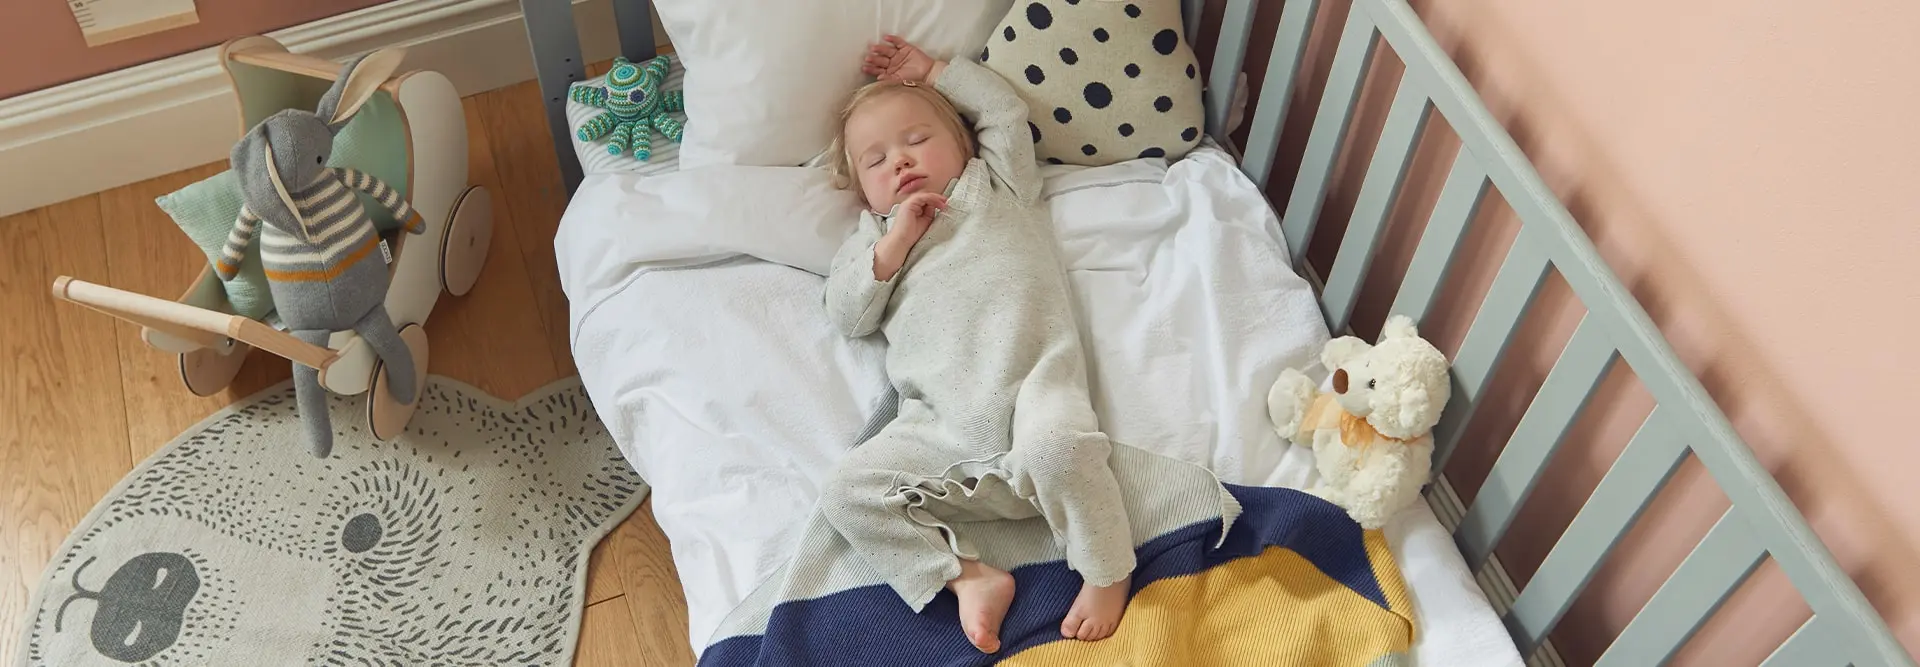 Sleeping baby on a cot bed in a nursery